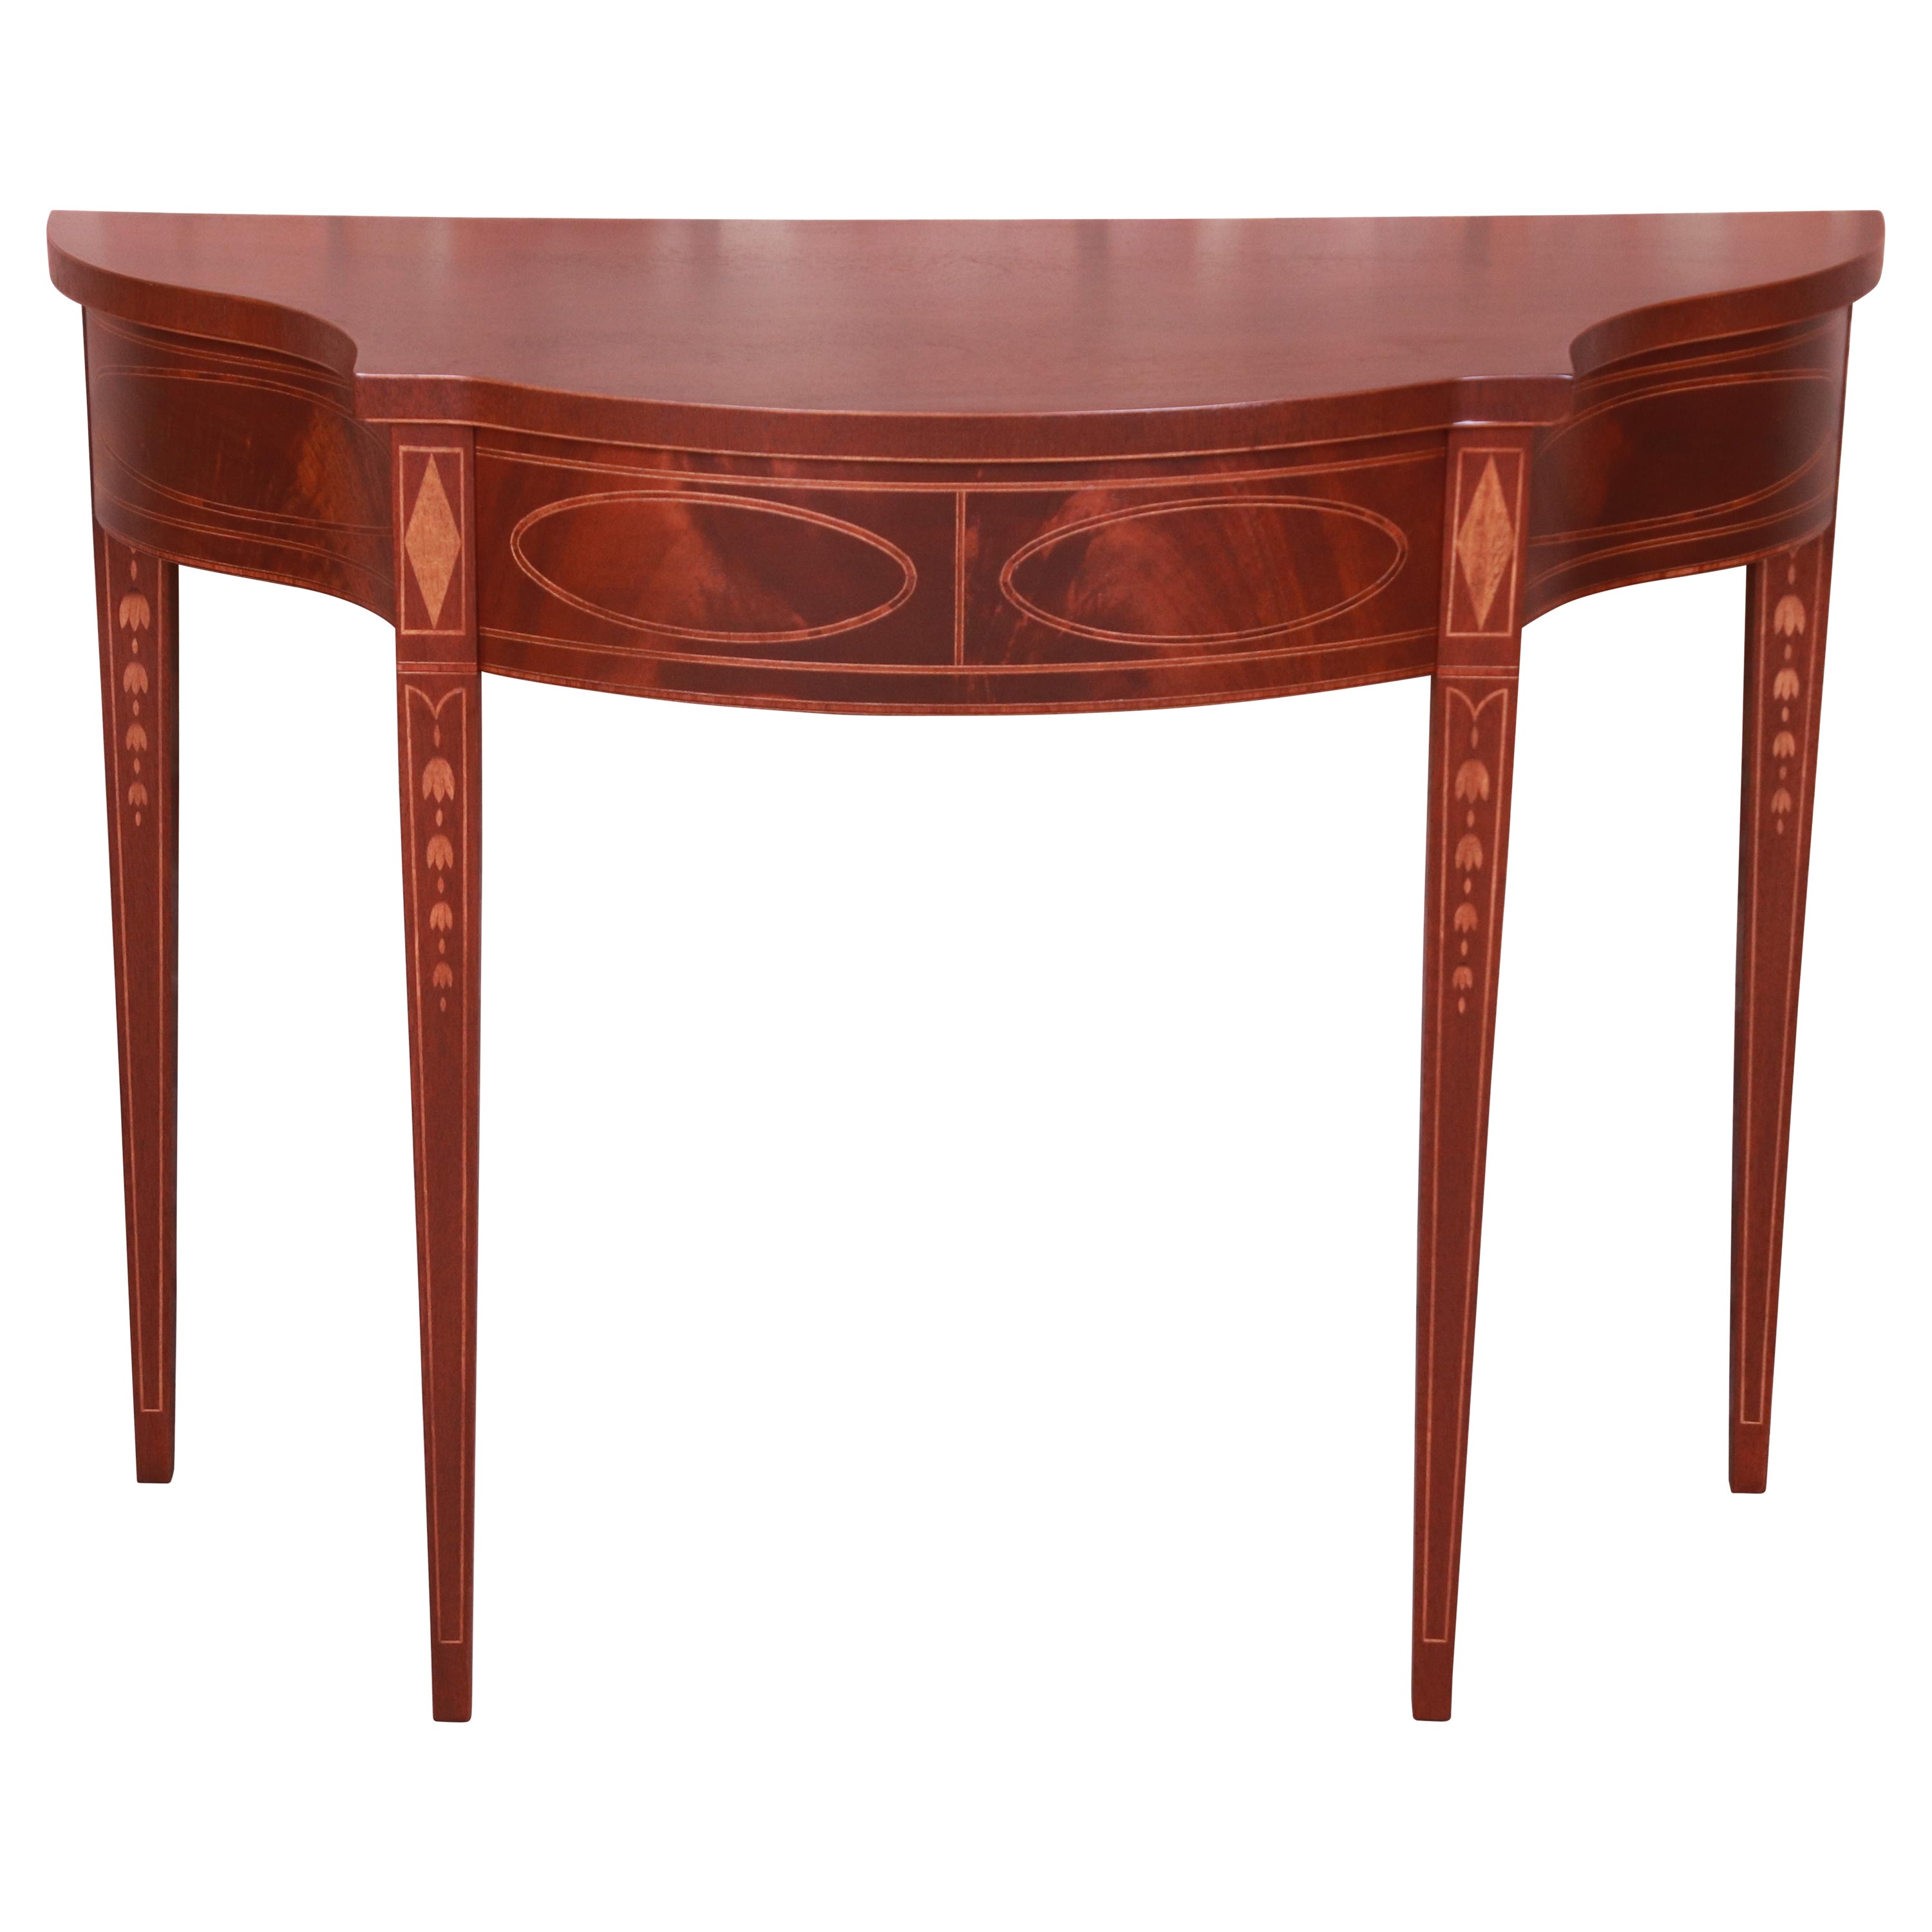 Baker Furniture Federal Inlaid Mahogany Console or Entry Table, Newly Refinished